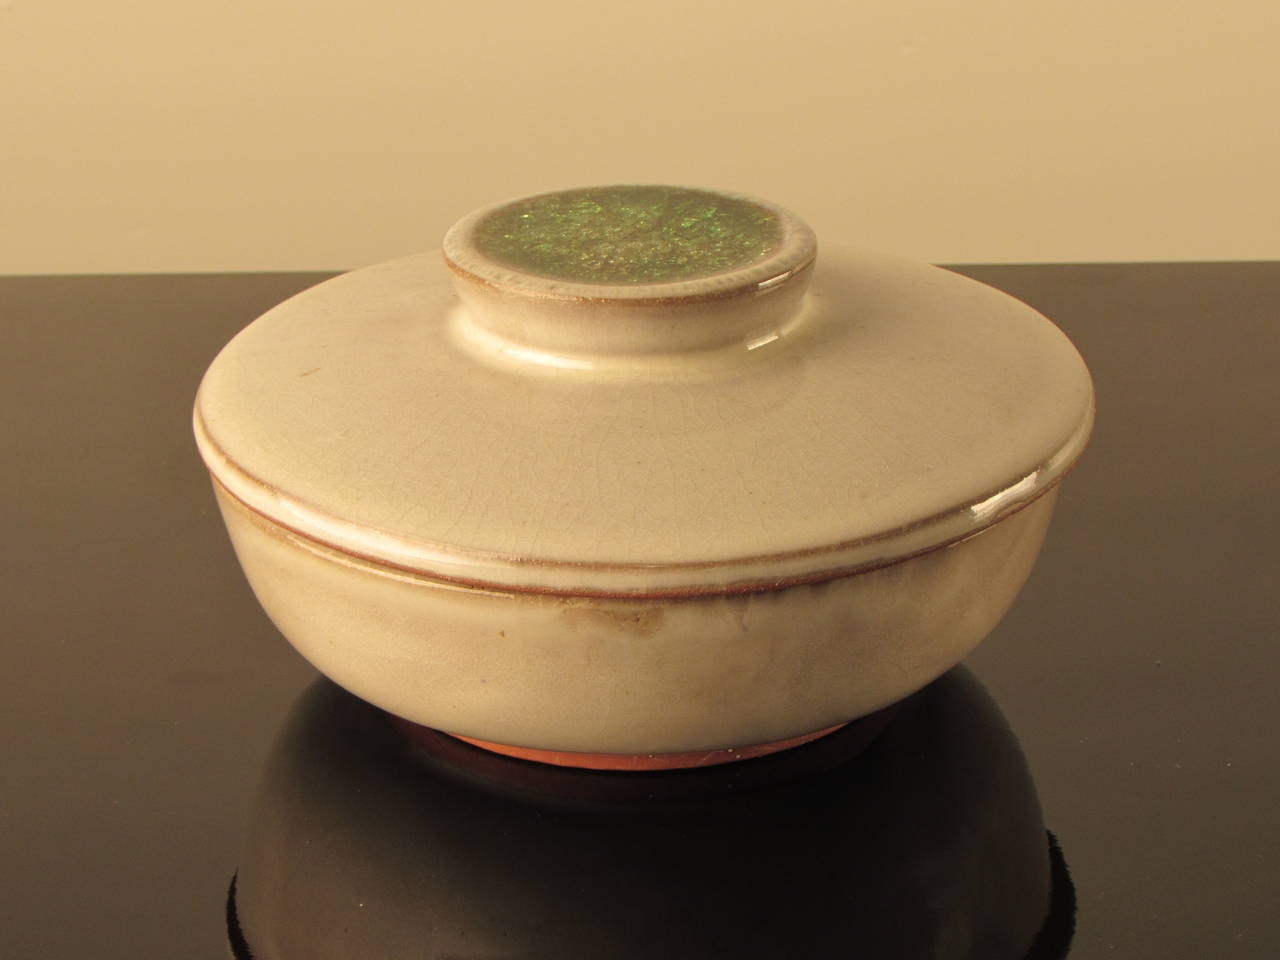 Lovely lidded vessel by Design Technics. Designer unknown. Simple white glaze showcases the stunning green crystalline glaze pool on top of the finial--a truly beautiful pot! Incised Design Technics mark underneath.